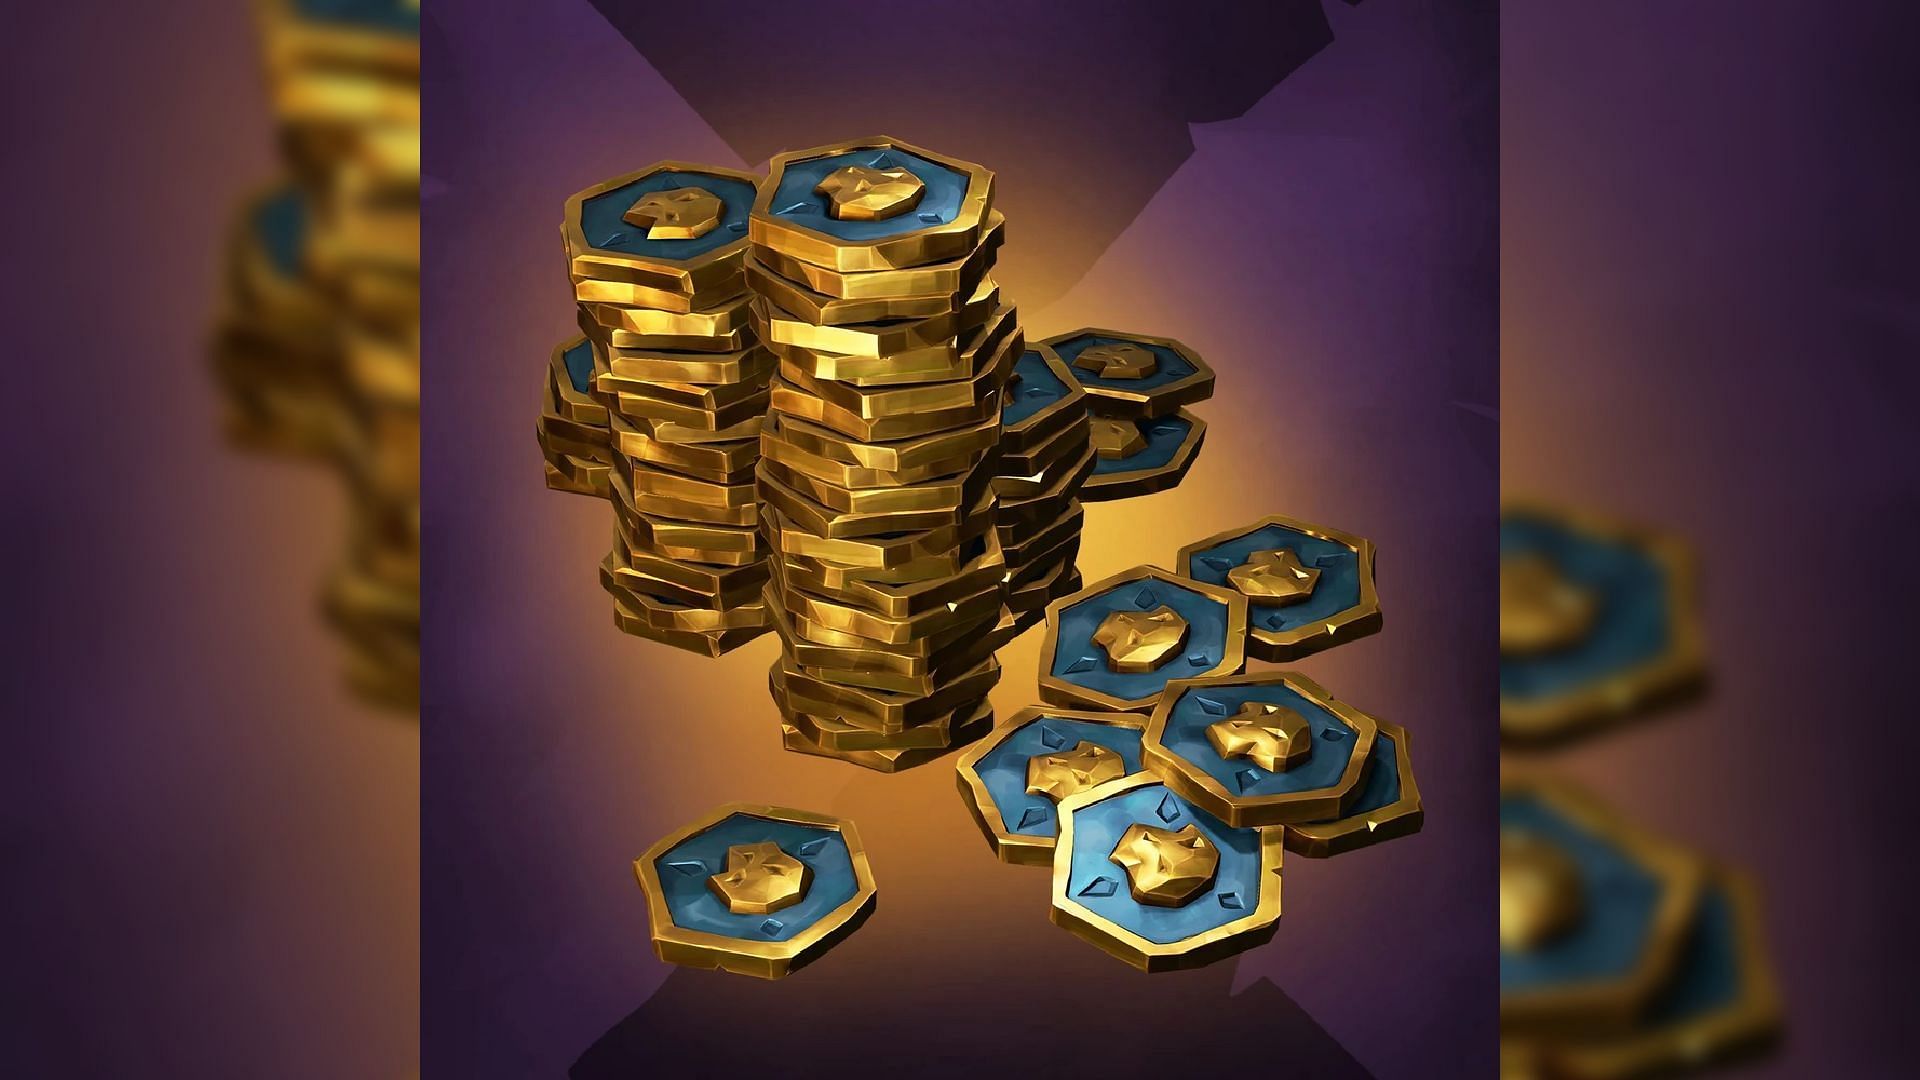 Ancient Coins (Image via Sea of Thieves wiki)